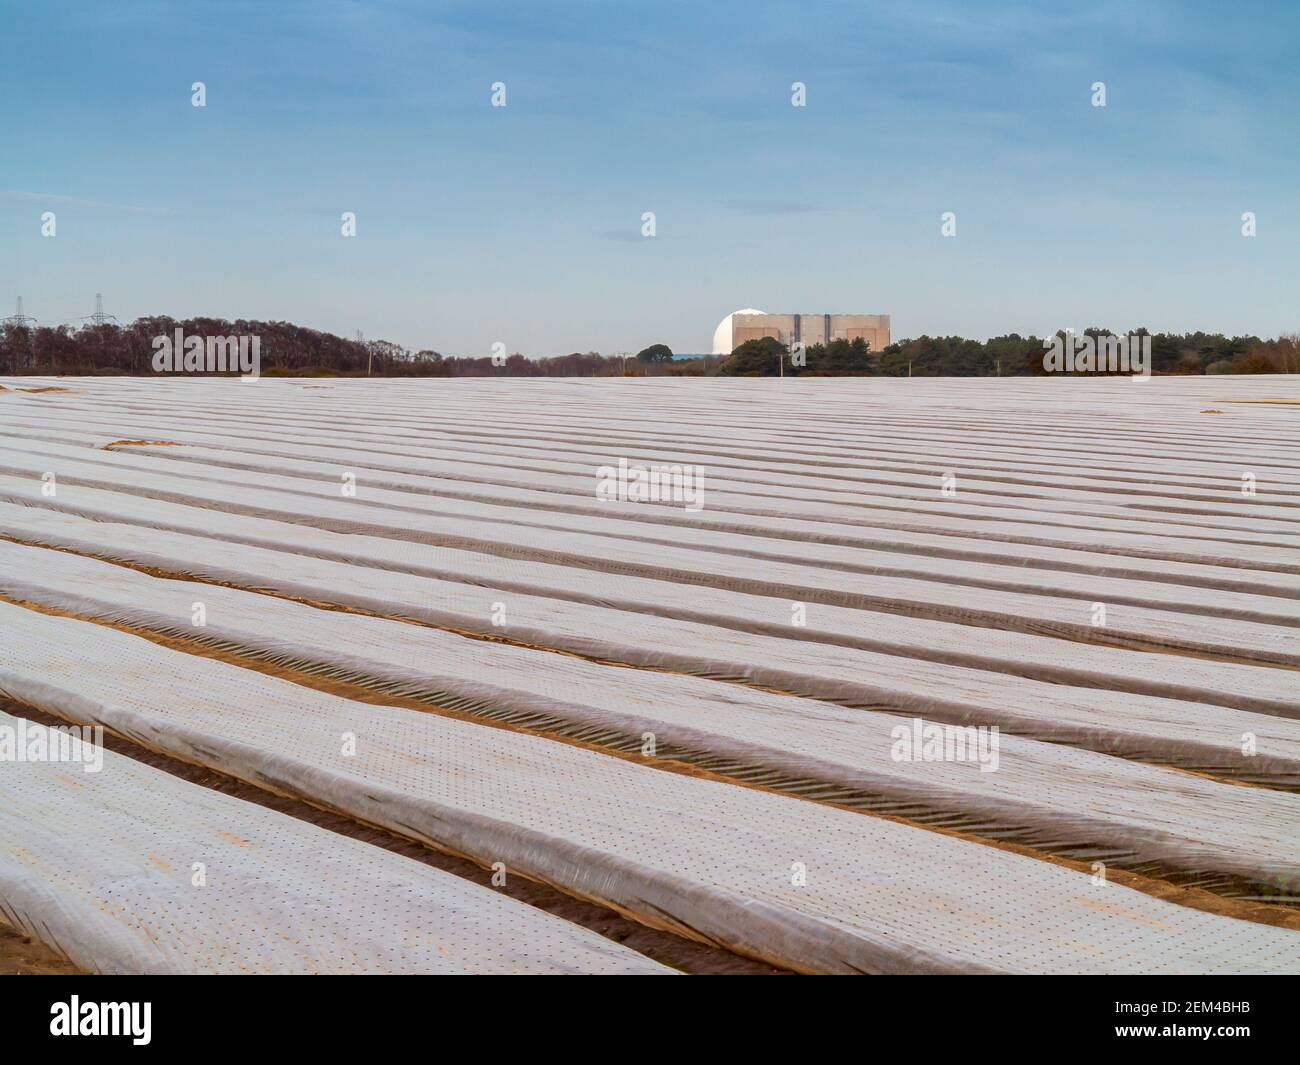 A foreground of a farm field covered in plastic mulch with Sizewell nuclear power station on the far horizon Stock Photo